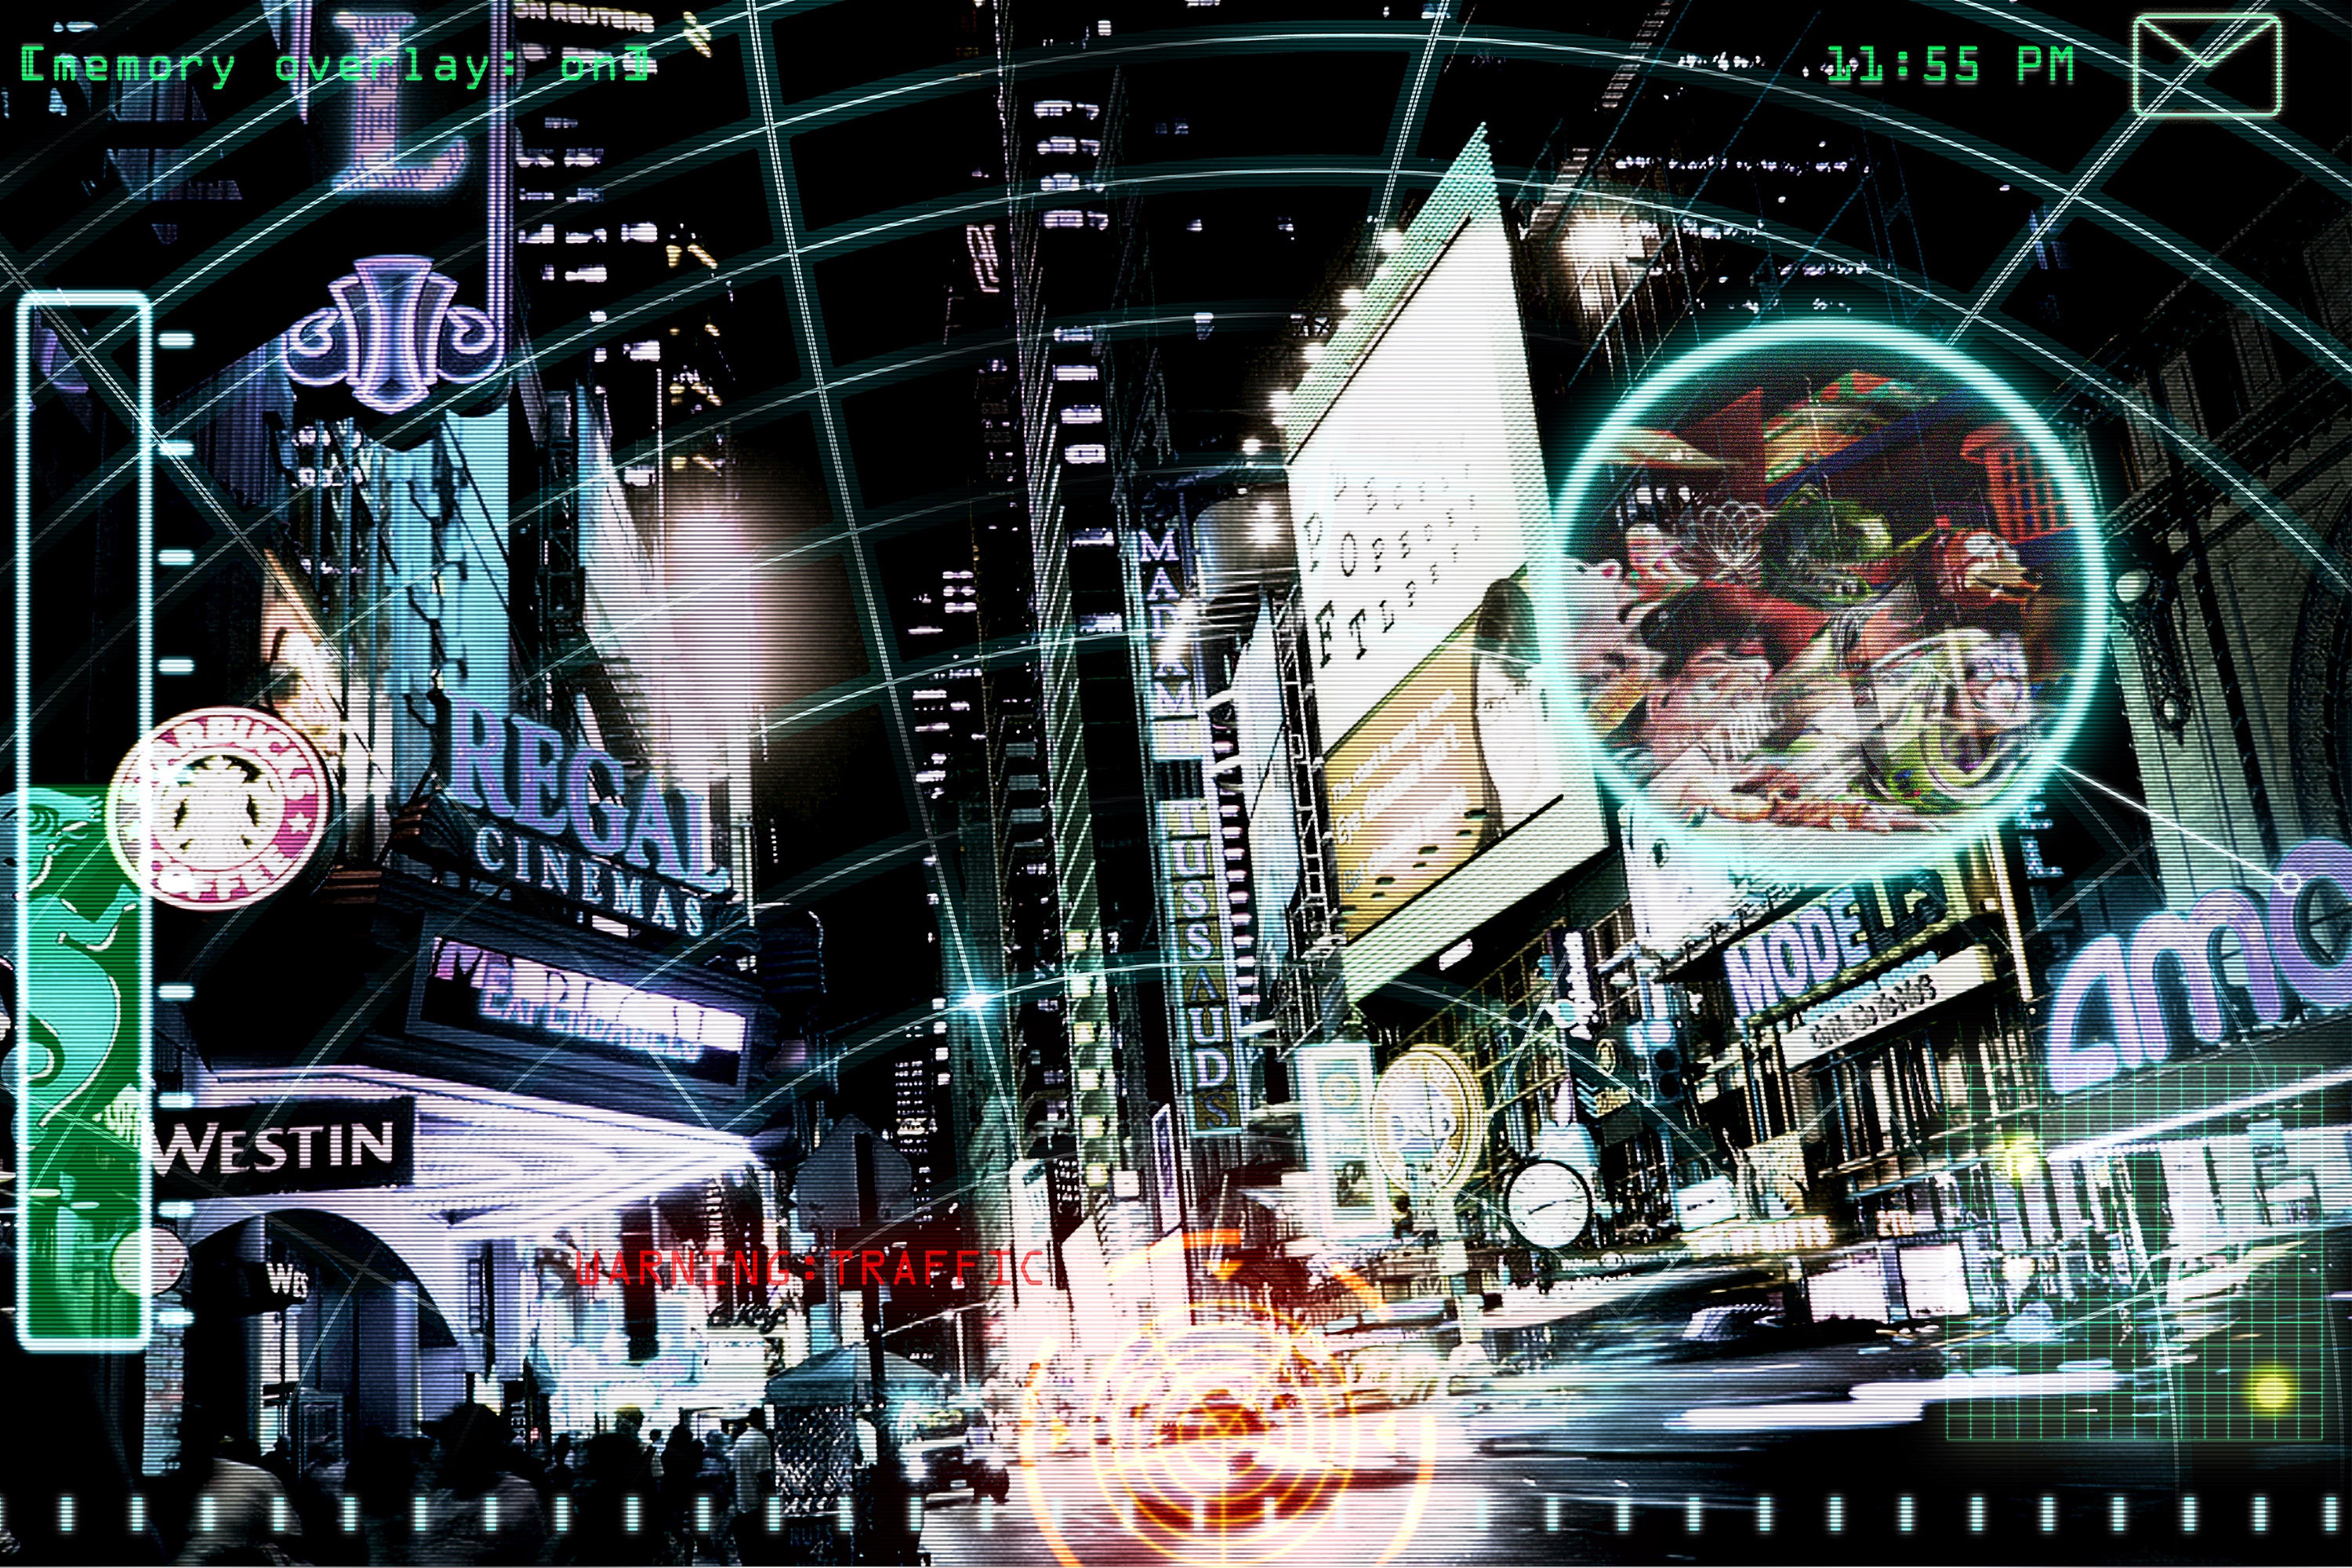 A stylistic night time rendering/collage of a street intersection. The image is overlayed with a pattern of radar.